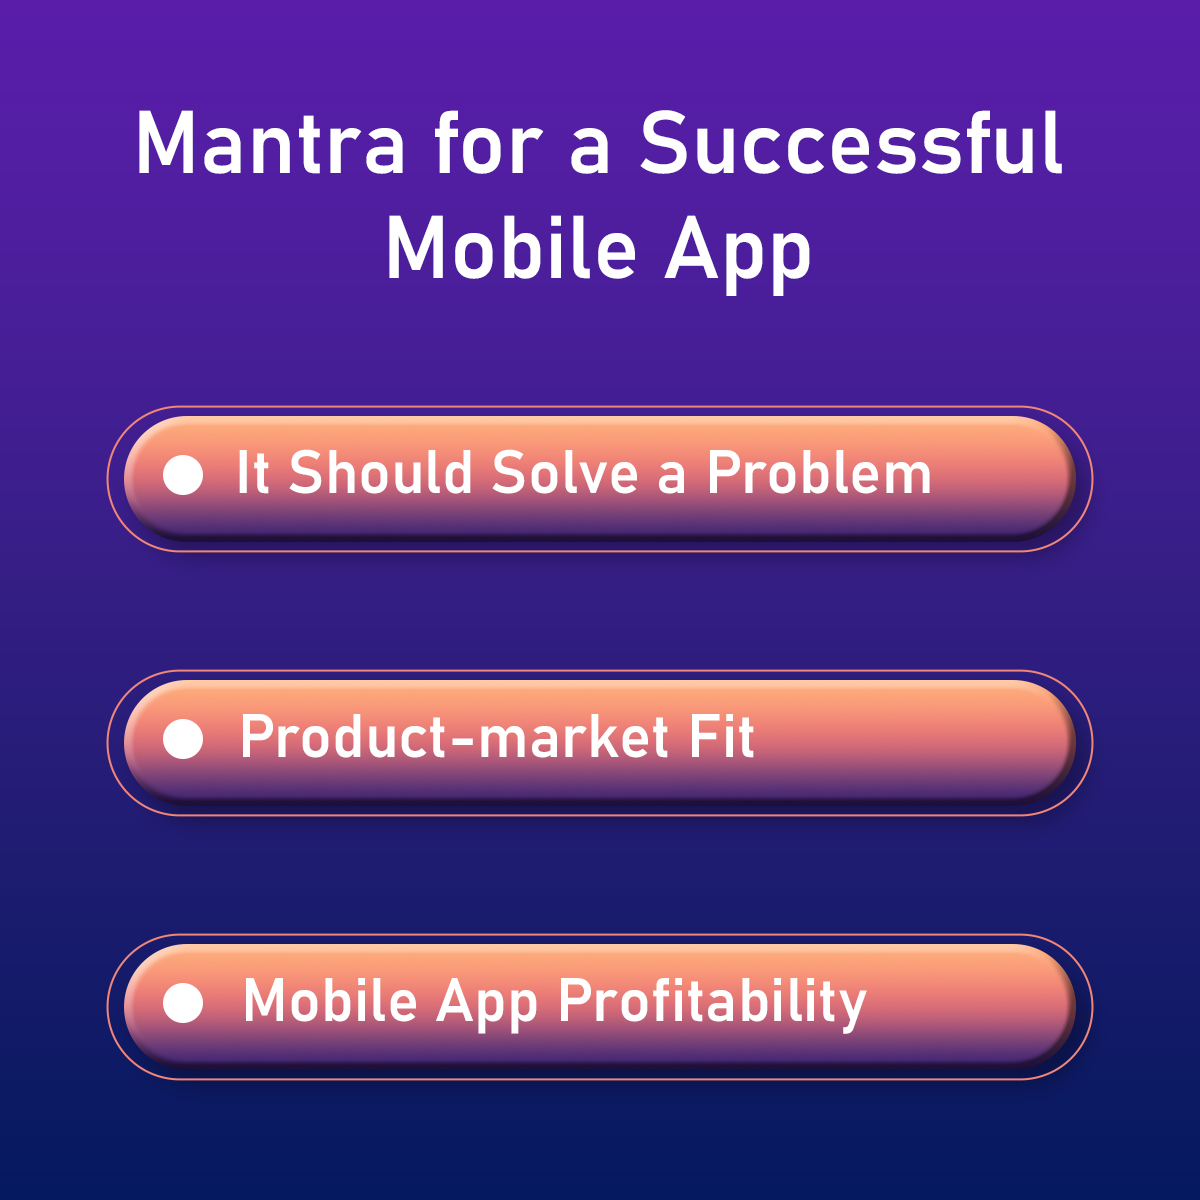 Mantra for a Successful Mobile App